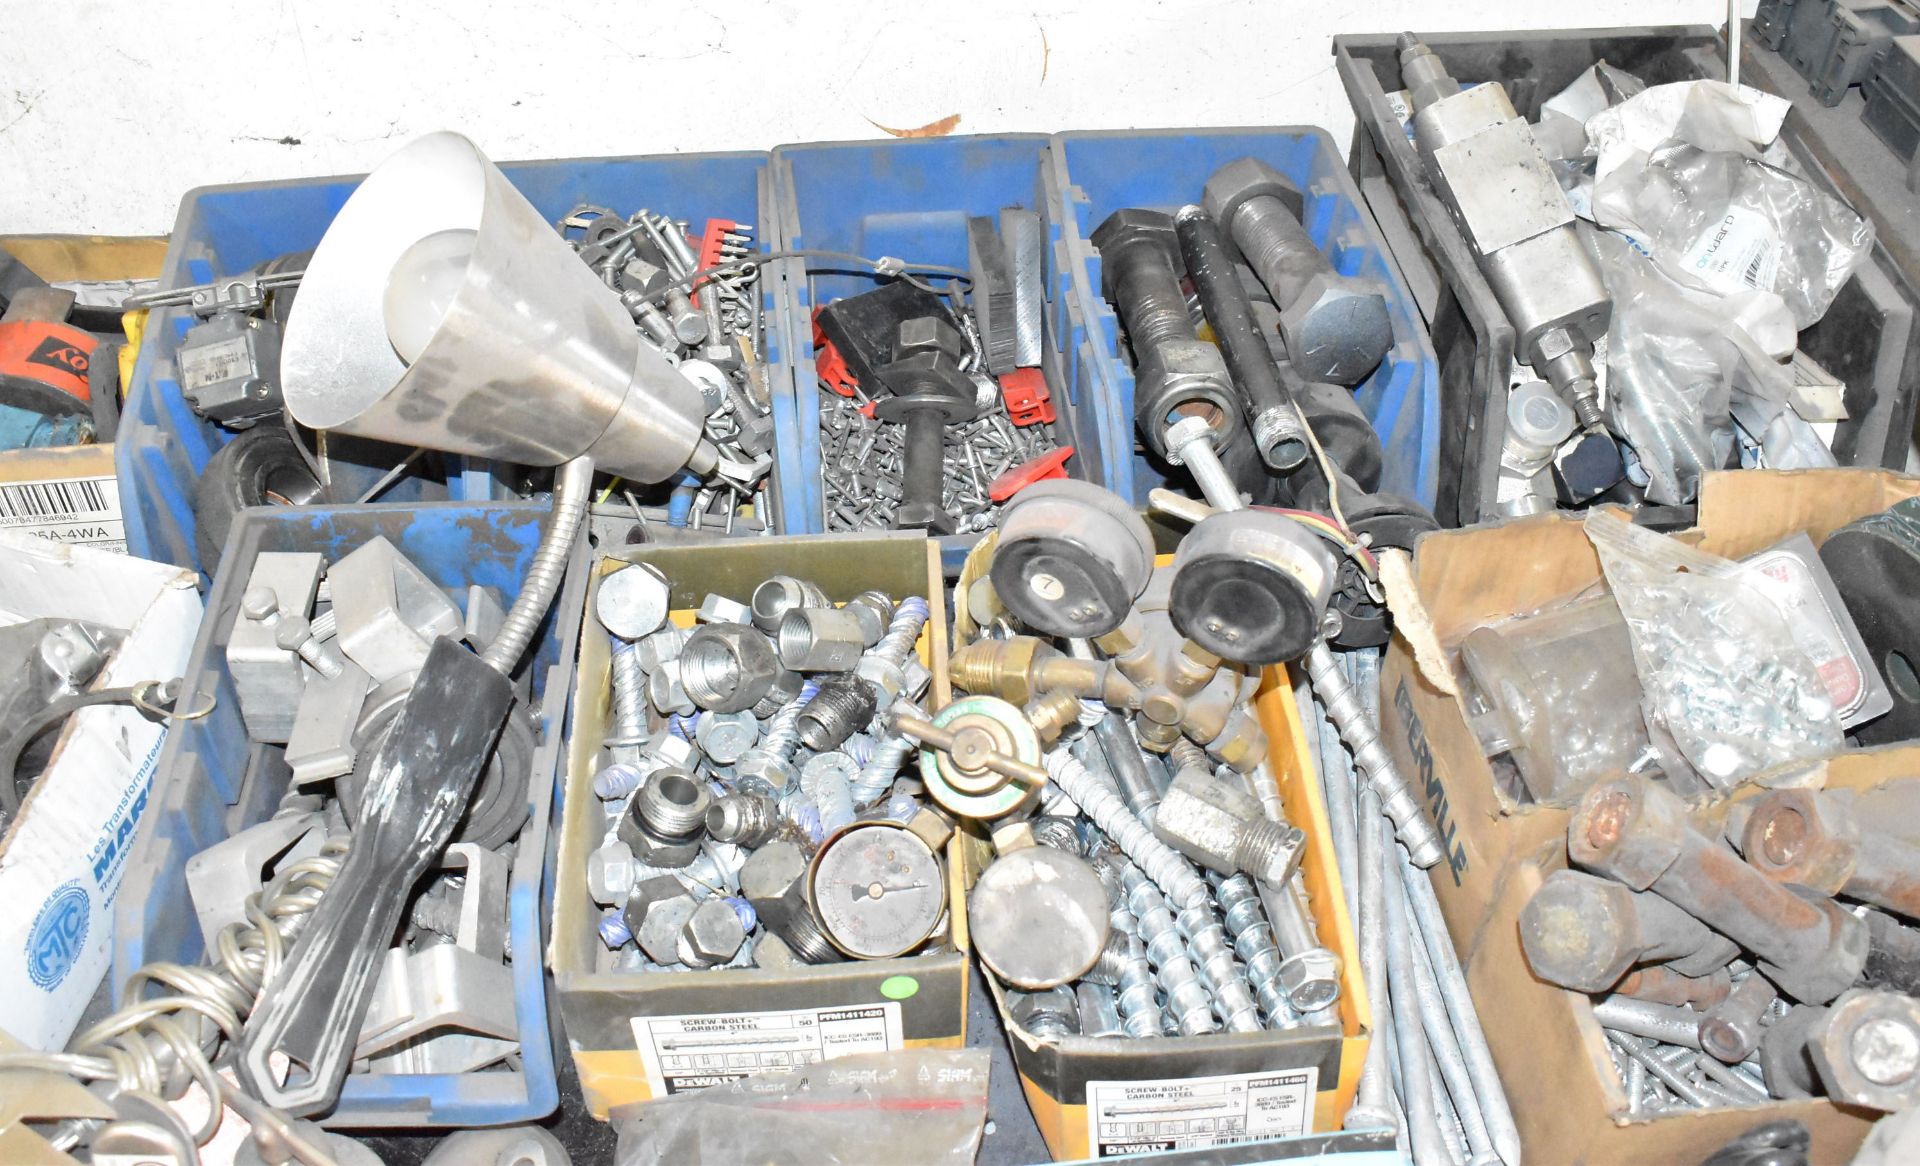 LOT/ SHOP TABLE WITH CONTENTS CONSISTING OF DRILL SHARPENER, HARDWARE, FITTINGS AND SUPPLIES - Image 3 of 4